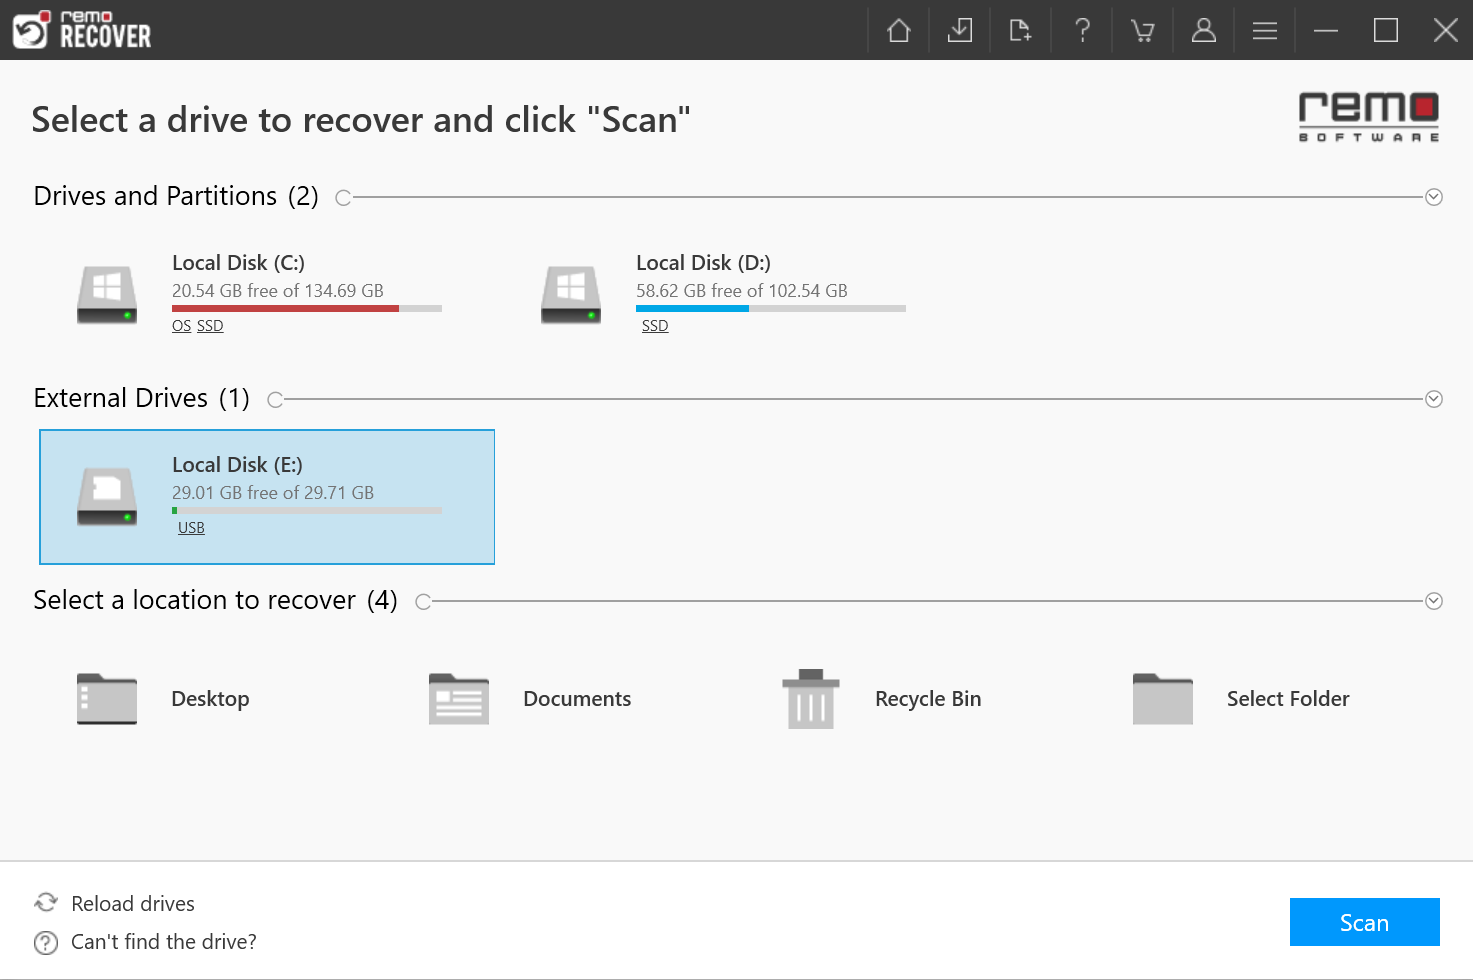 connect SD card to Windows 10 and launch Remo Recover